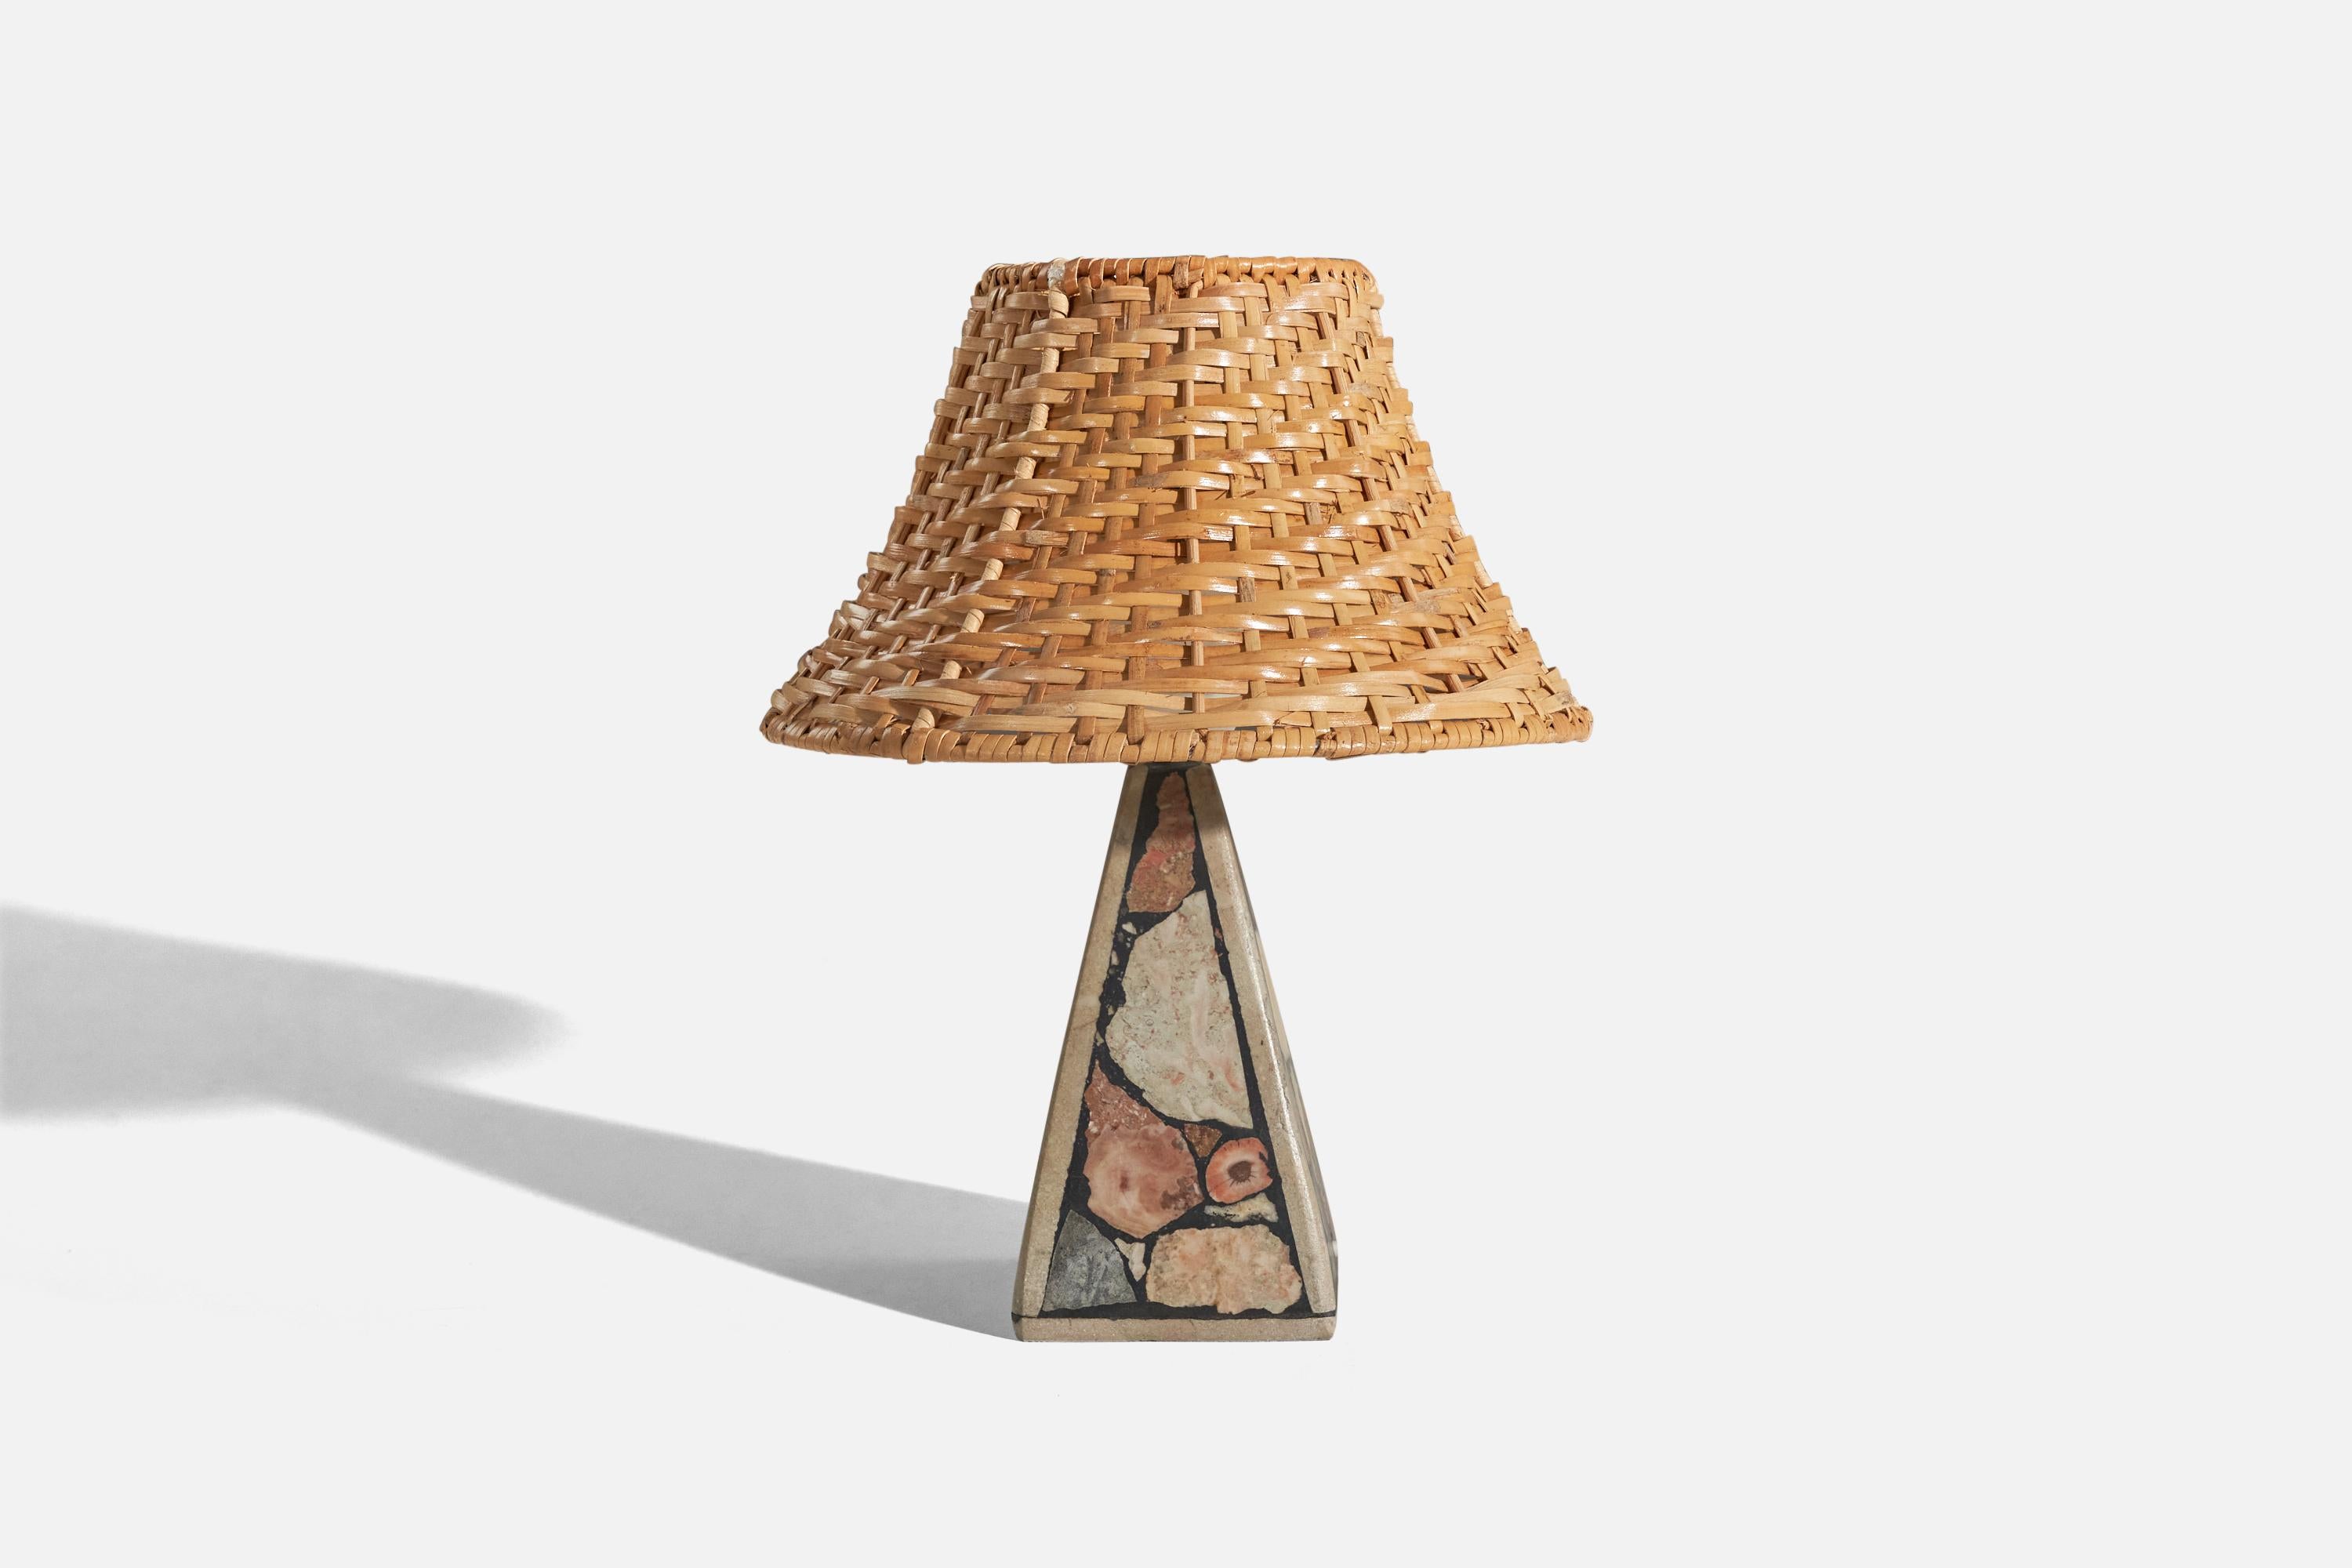 A solid stone table lamp with fossil pieces, Pietra Dura technique, designed and produced in Sweden, c. 1970s.

Sold with lampshade. 
Dimensions of lamp (inches) : 8 x 3.43 x 3.39 (height x width x depth)
Dimensions of shade (inches) : 3.87 x